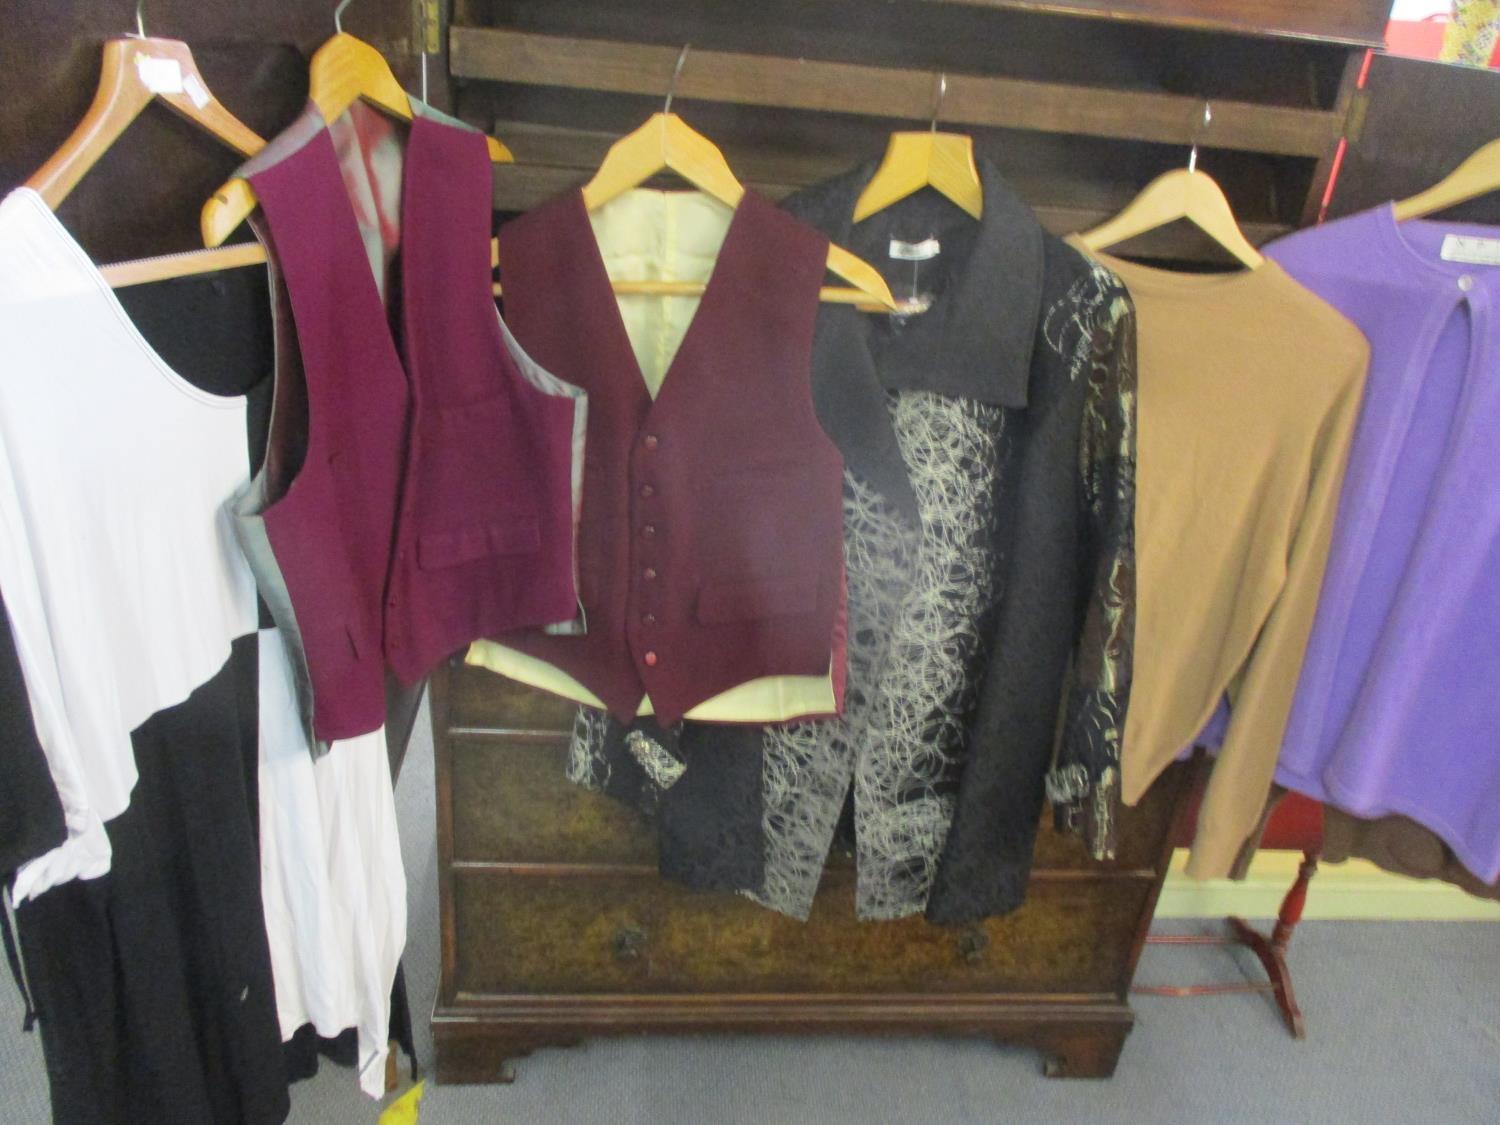 Ladies and gents cashmere sweaters, gents waistcoats, and mixed clothing, various sizes Location: